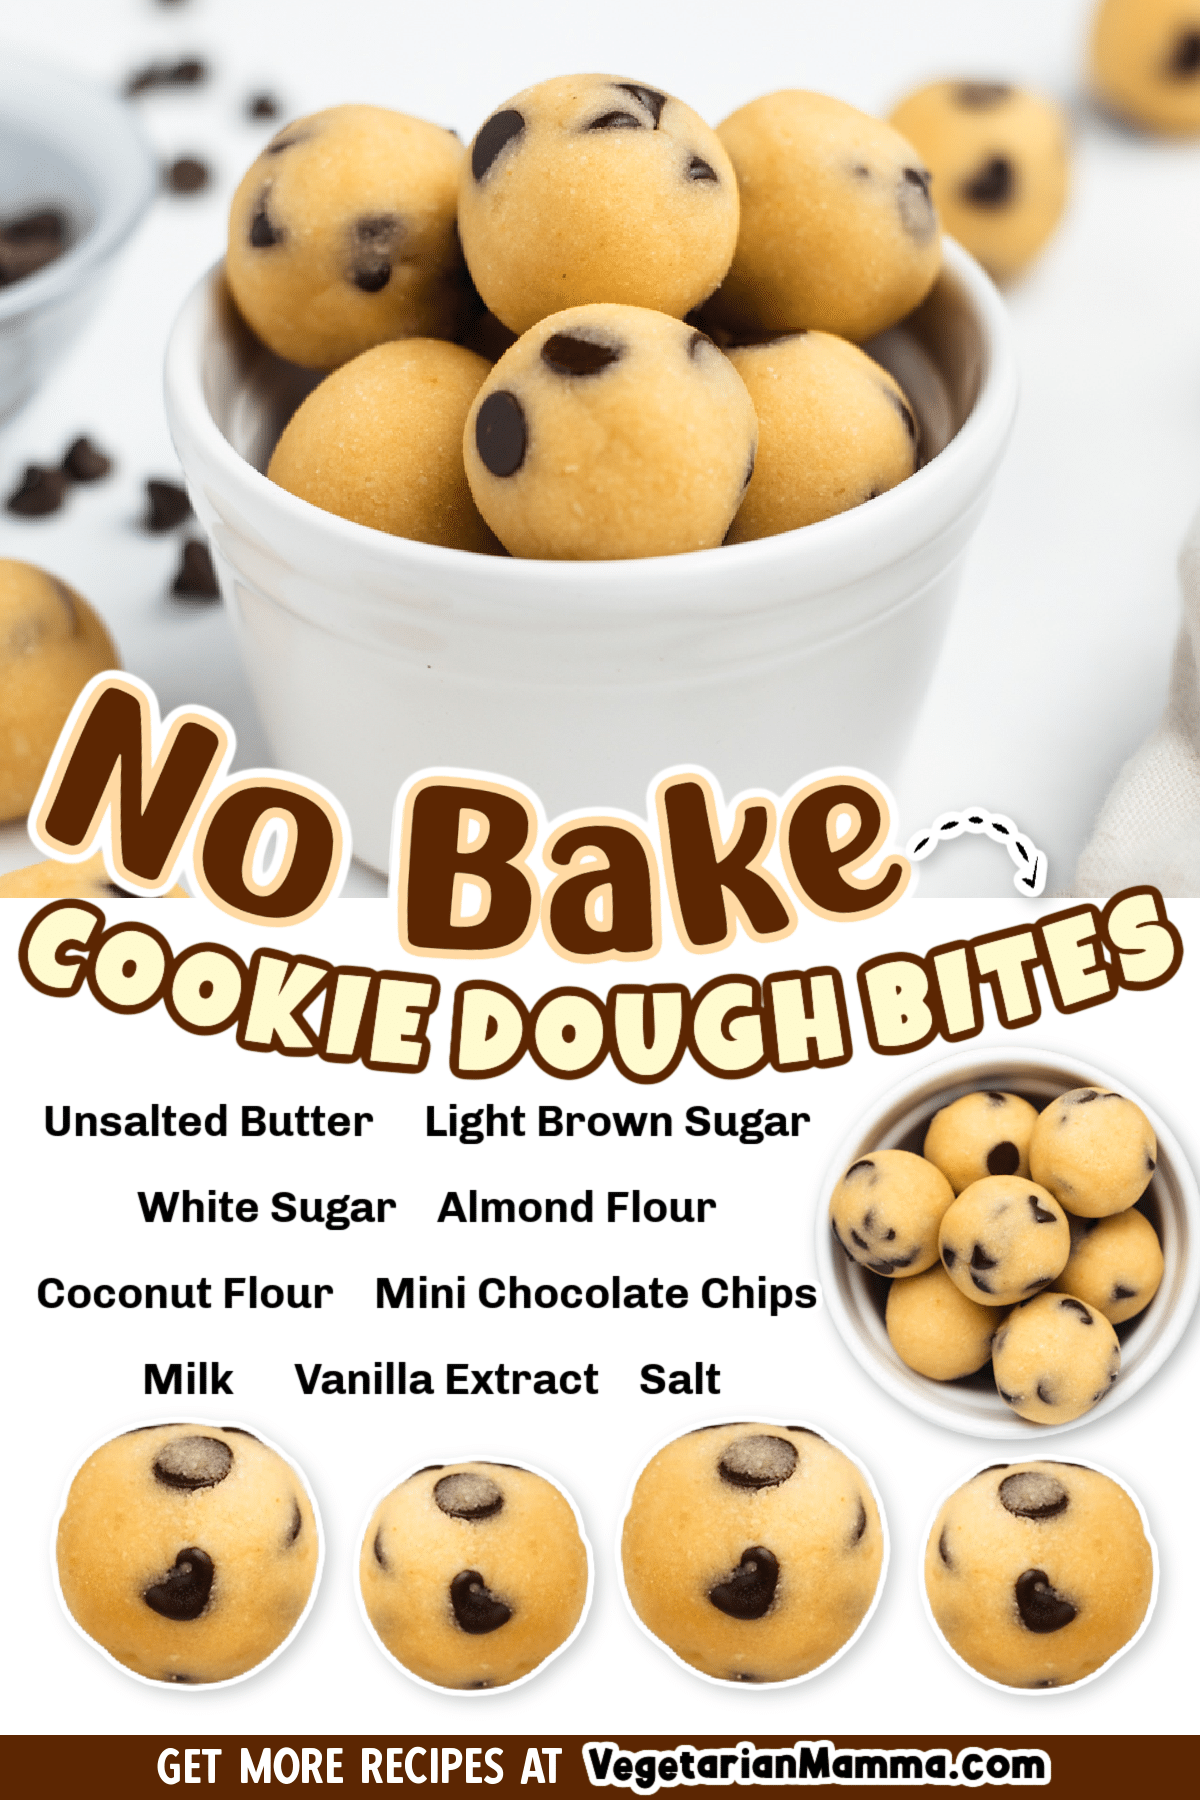 Mix up a few simple ingredients and you'll have a delicious batch of No-Bake Cookie Dough Bites ready in under 15 minutes! Edible gluten-free cookie dough bites are perfect to pack in lunches or enjoy as an afternoon treat.